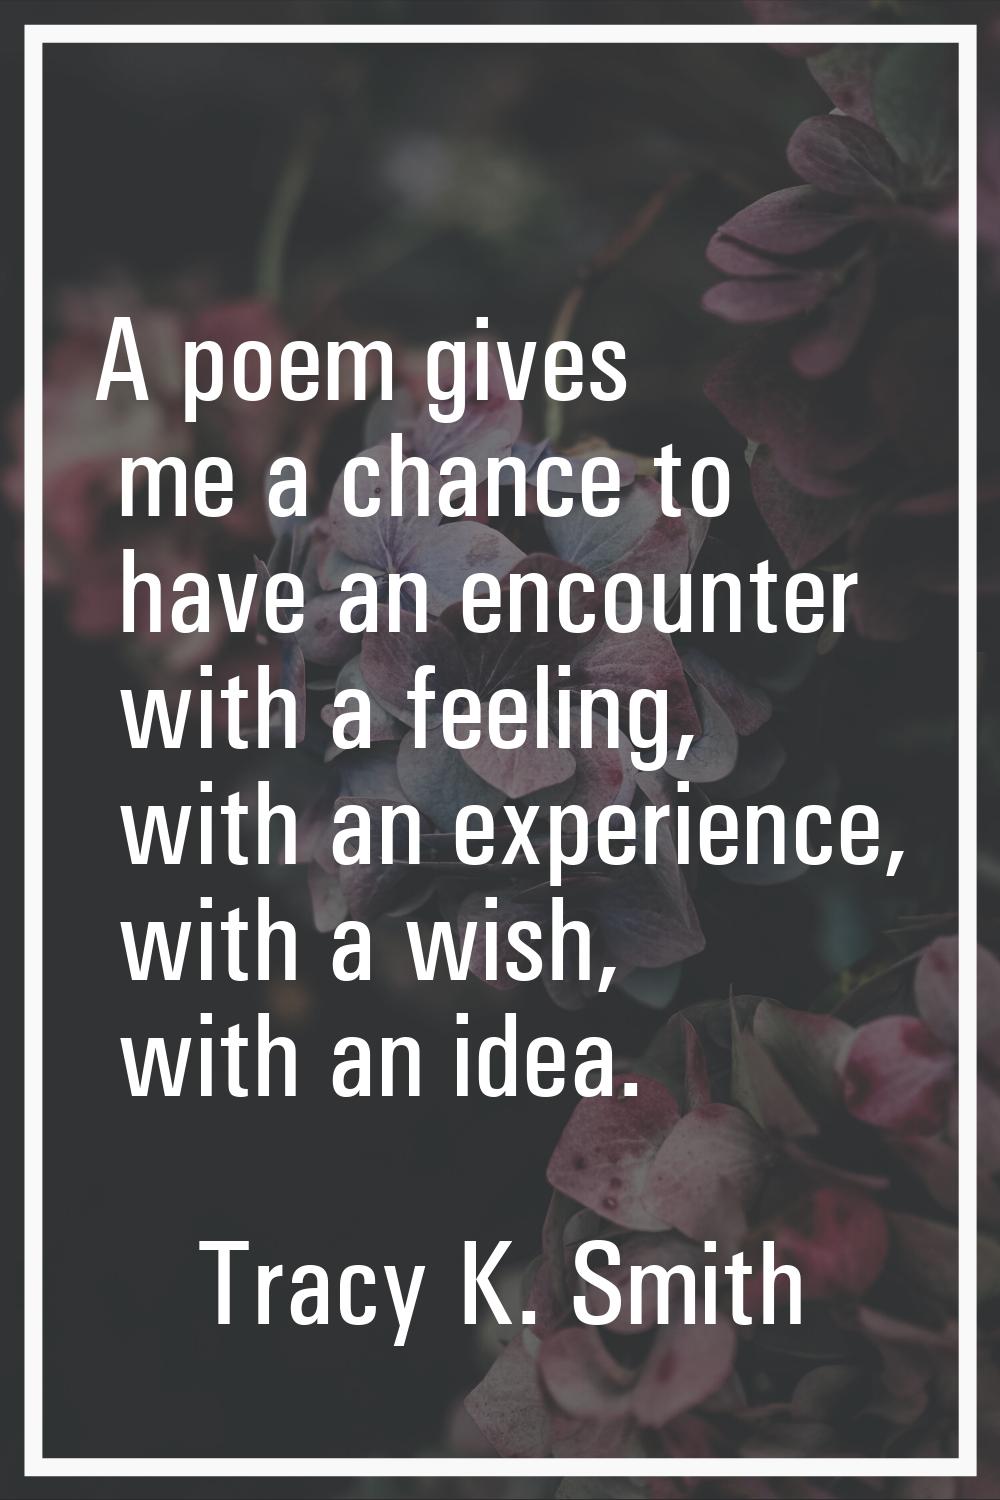 A poem gives me a chance to have an encounter with a feeling, with an experience, with a wish, with